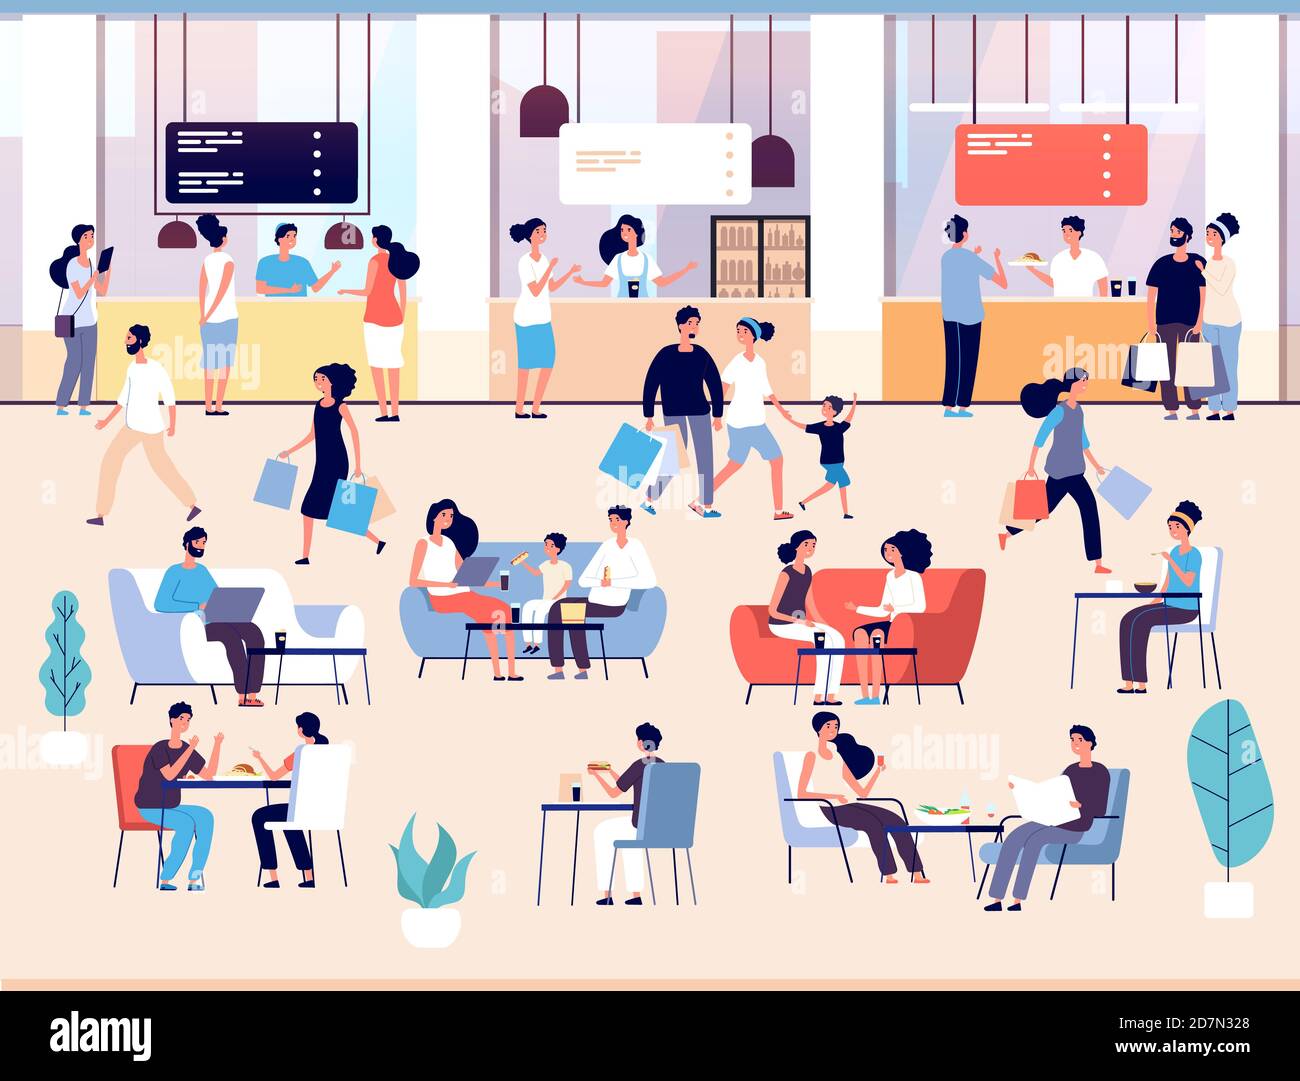 People in restaurant. Men and women eating meal in cafe buffet. Families having lunch in food court interior vector concept. Illustration of cafe and restaurant in shopping mall Stock Vector